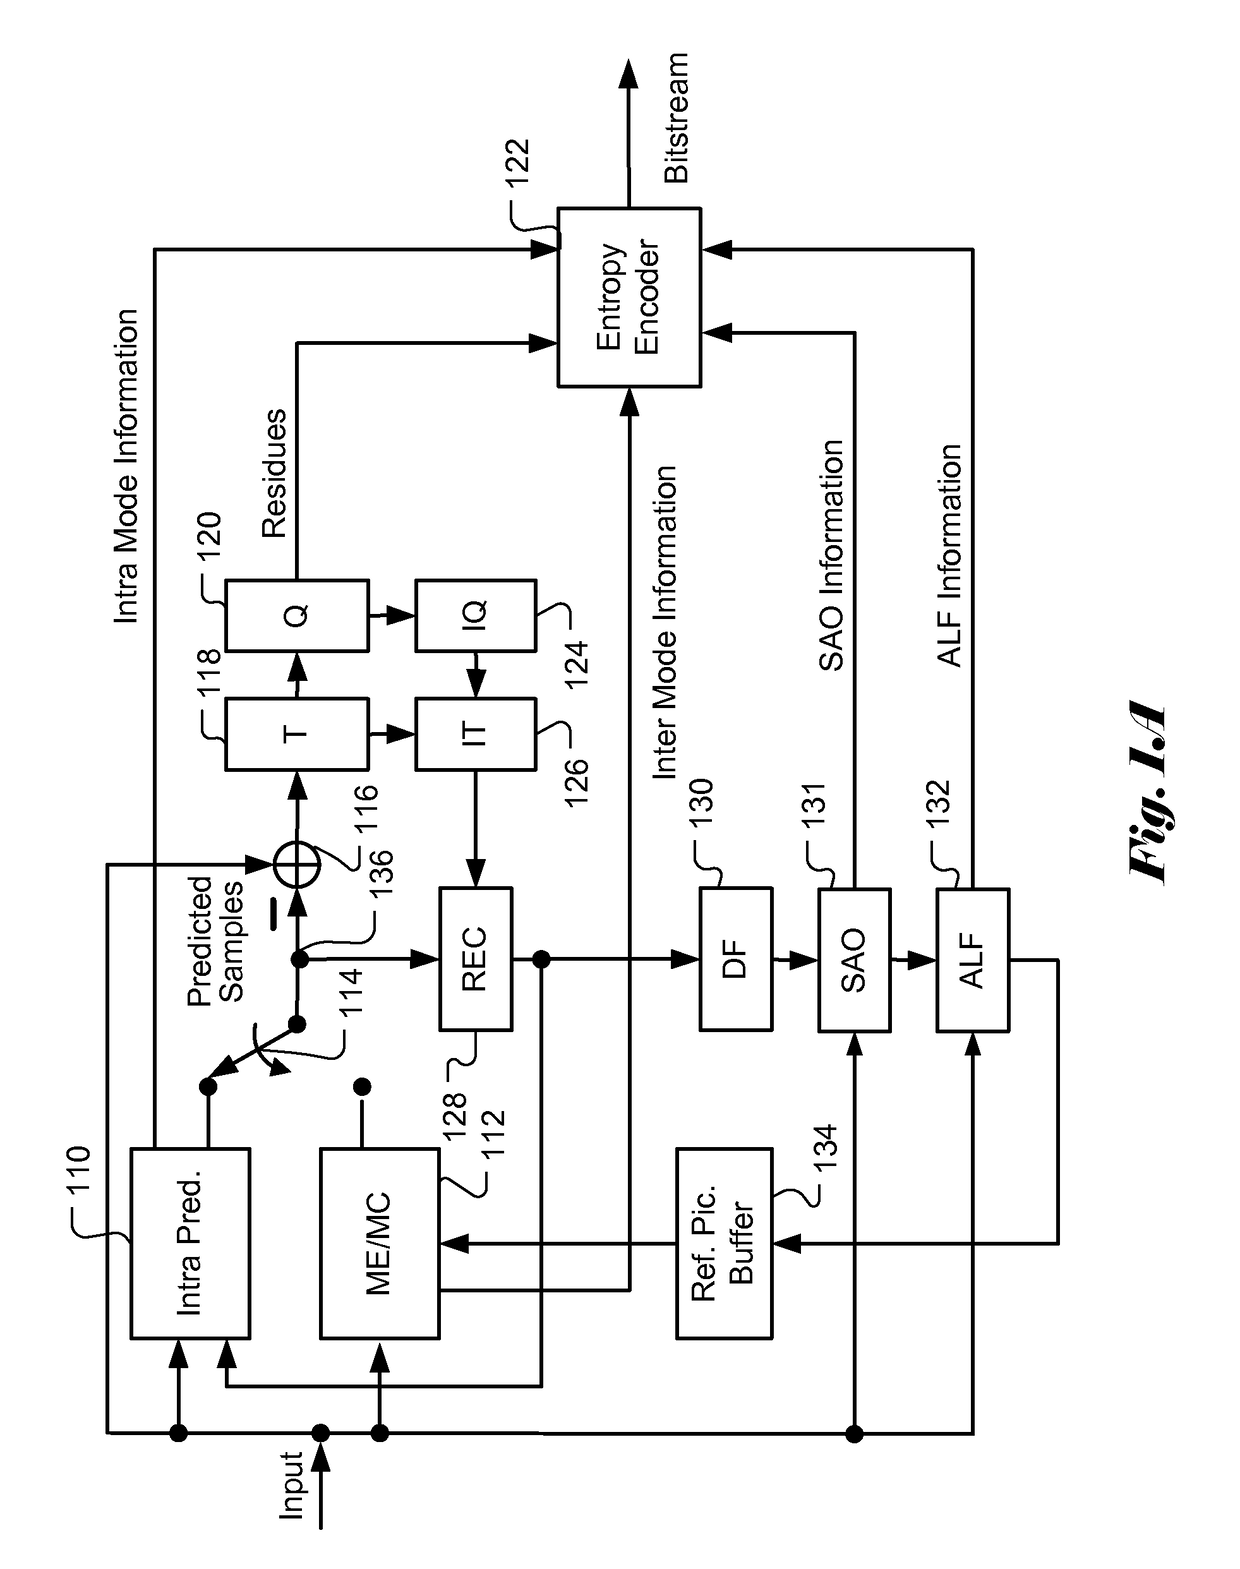 Method and apparatus for video processing incorporating deblocking and sample adaptive offset